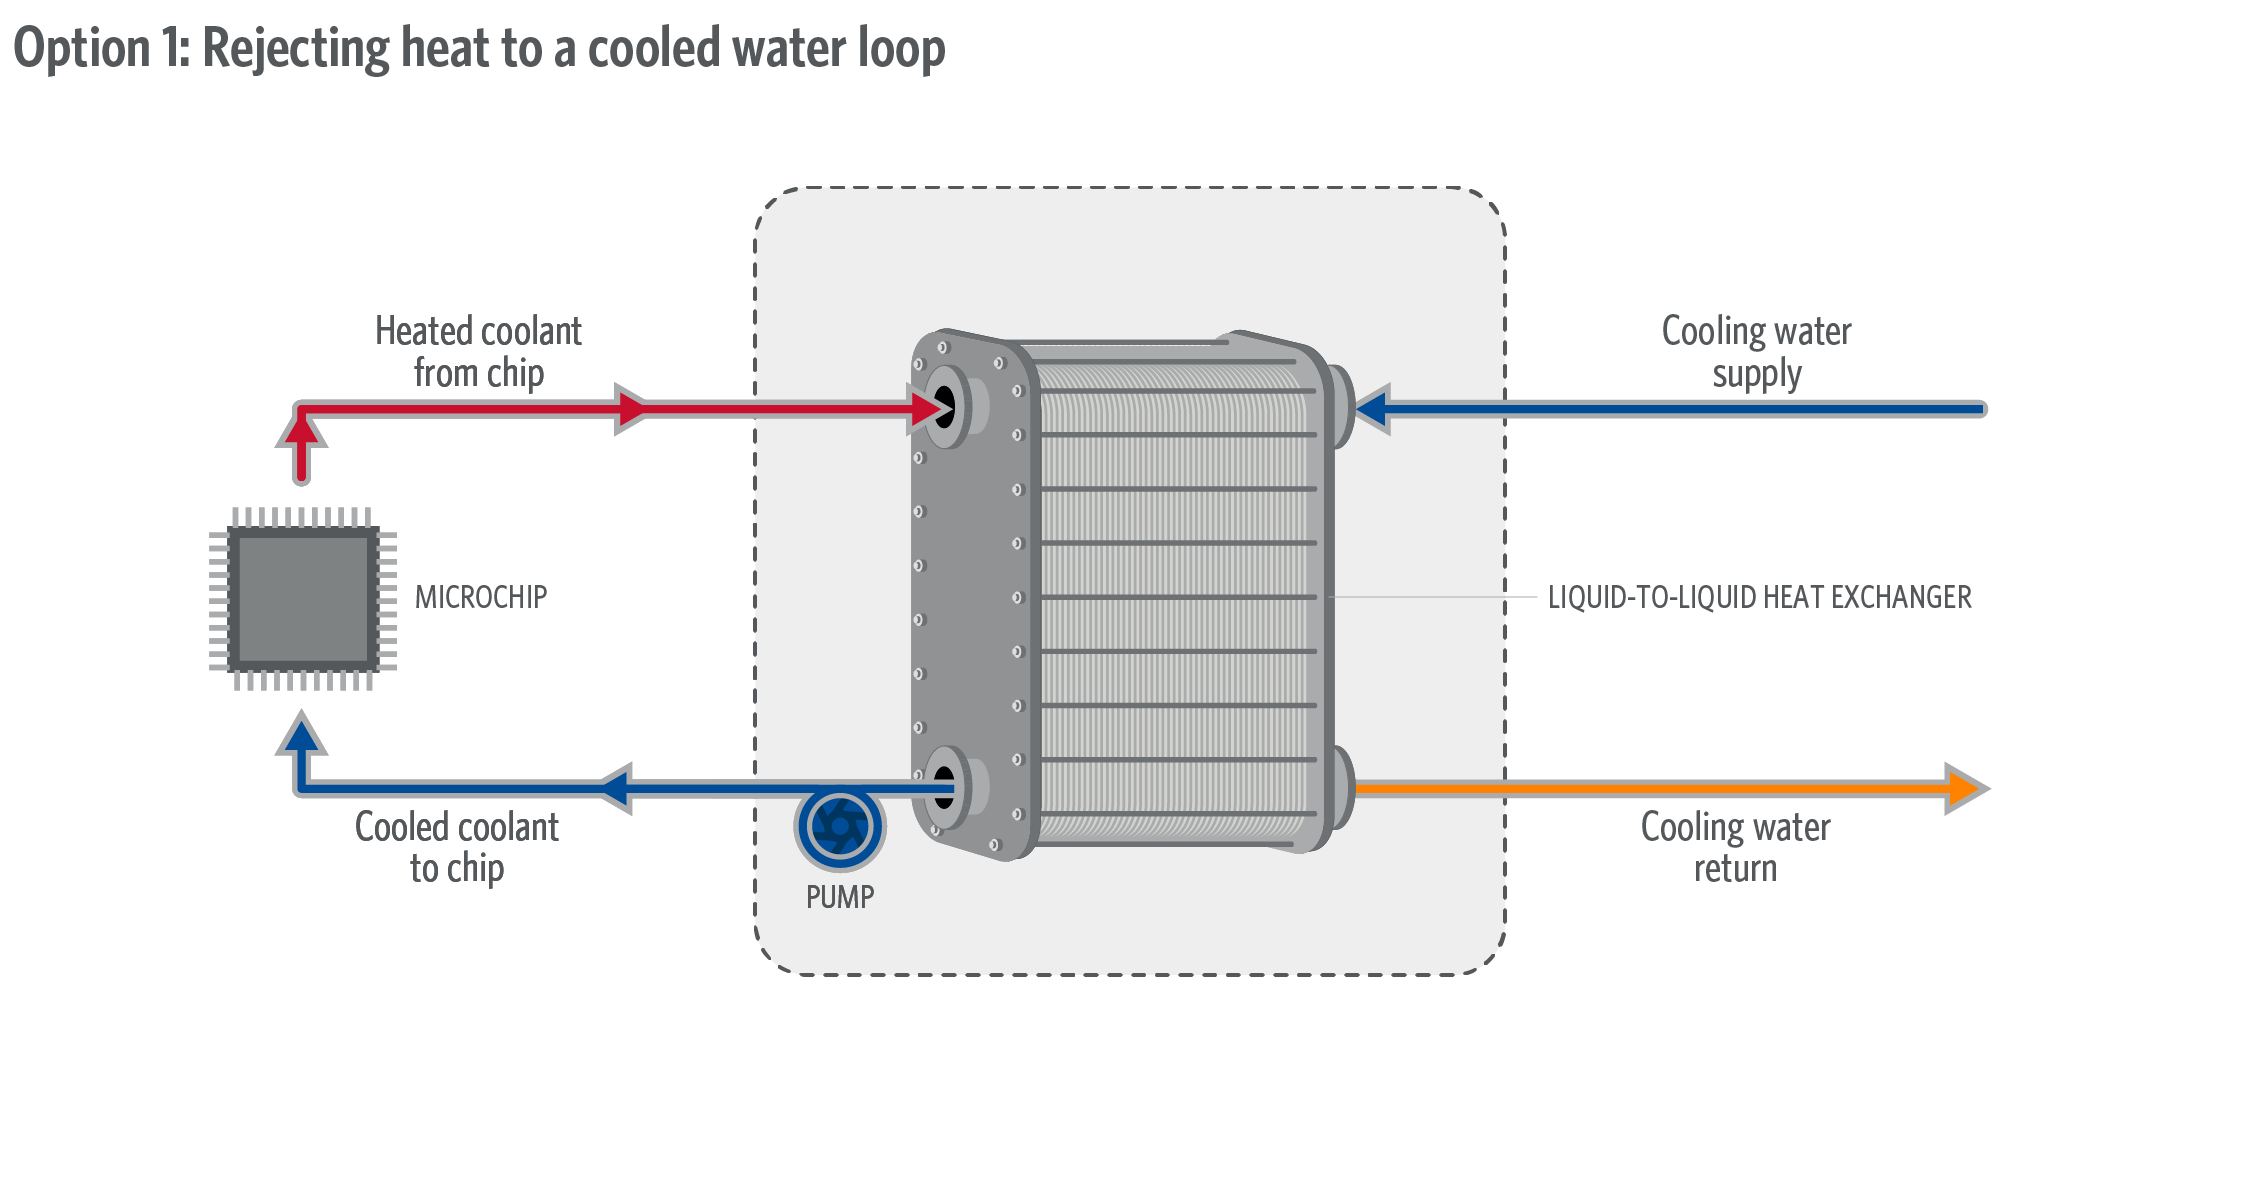 Rejecting heat to a cooled water loop.